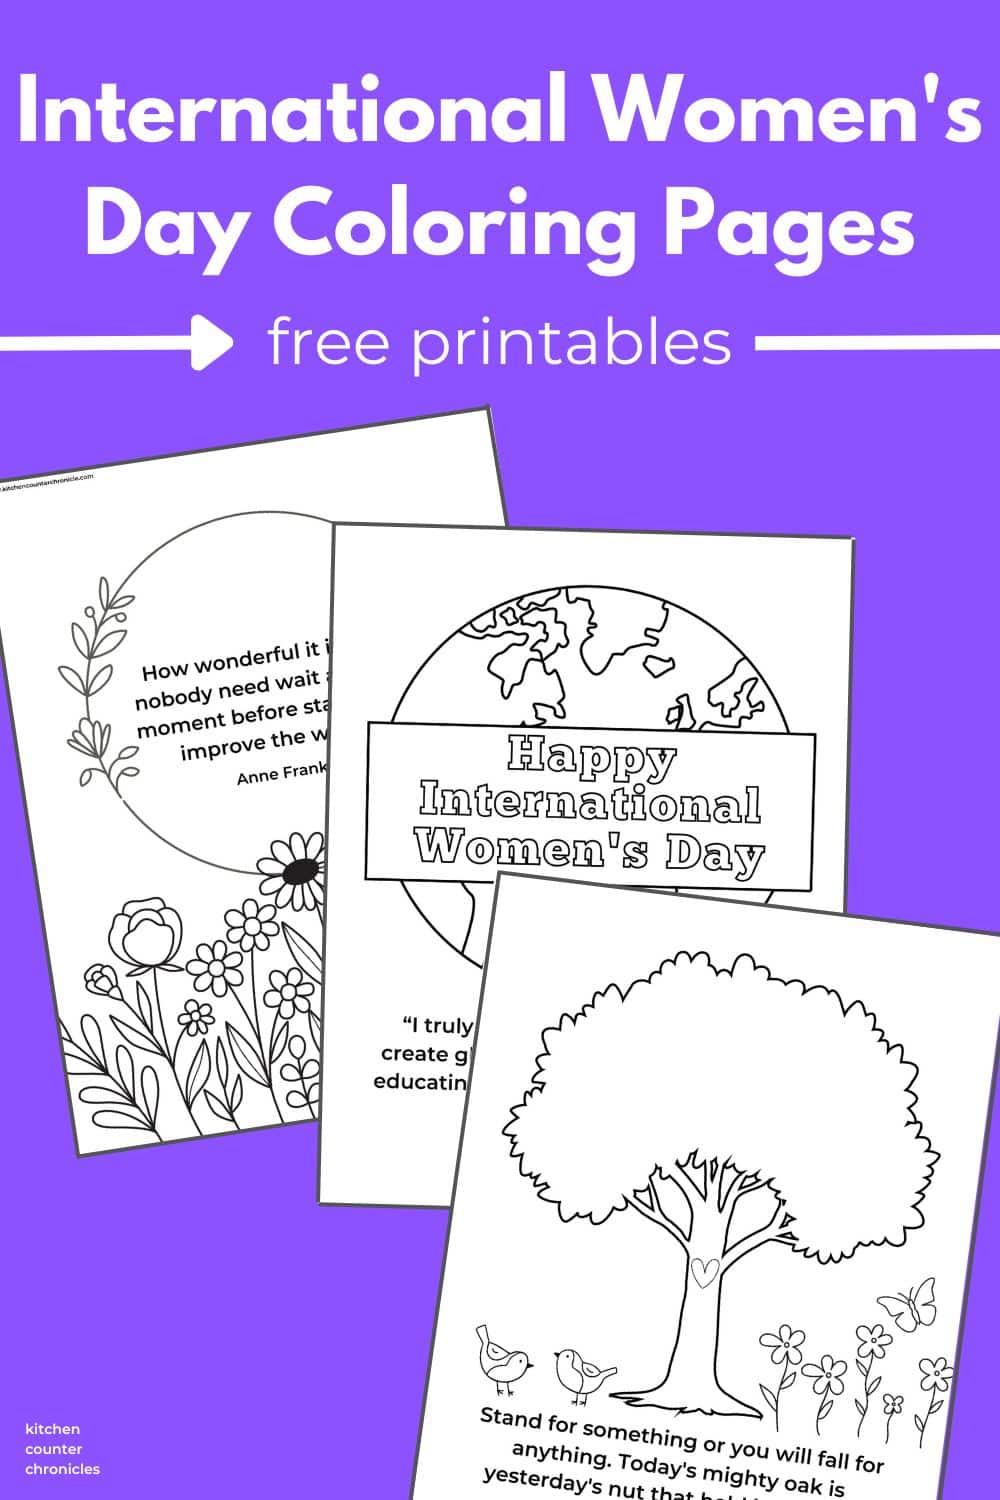 3 printed international women's day coloring pages with title on purple background